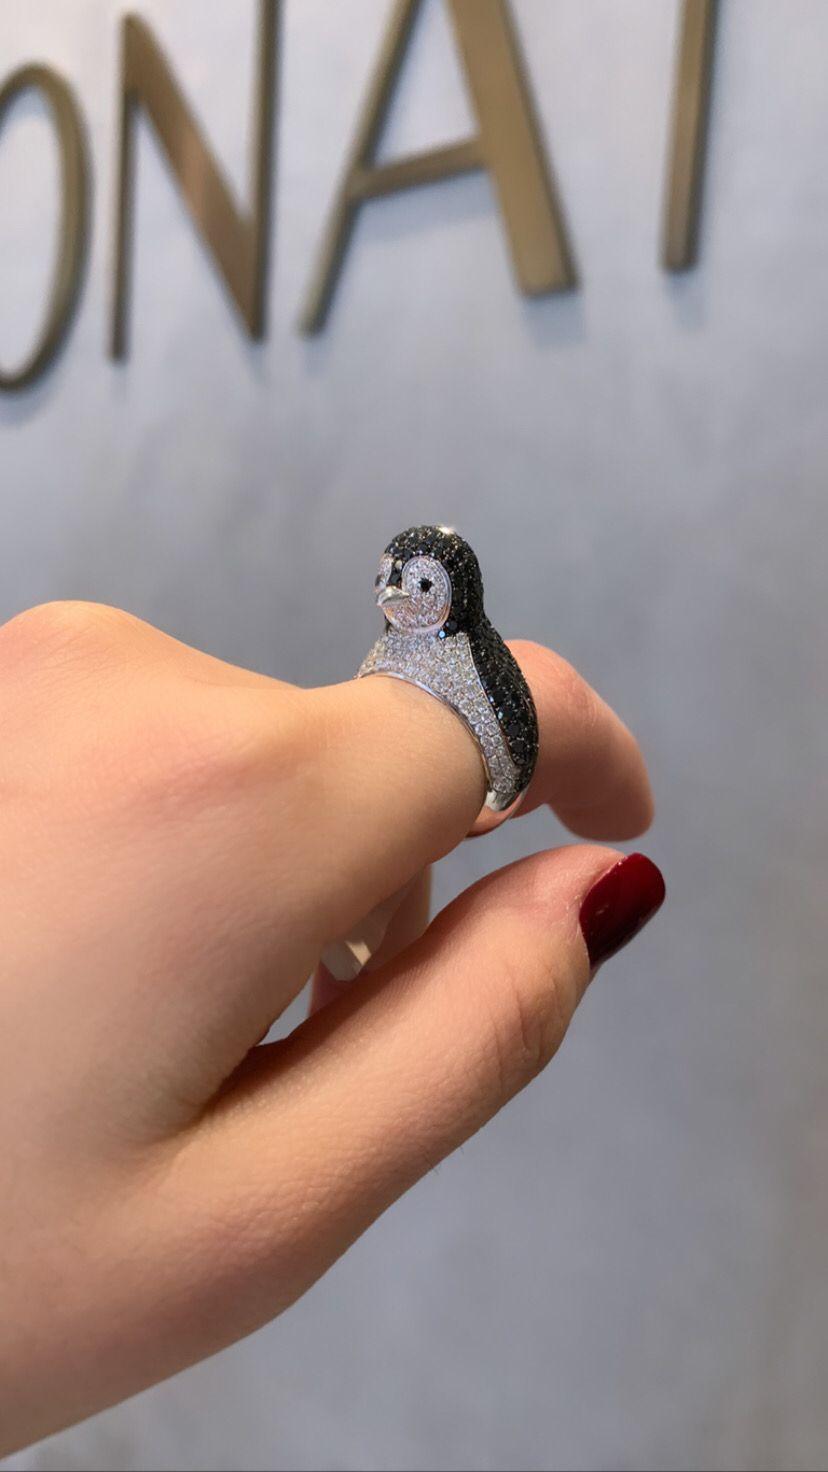 Limited Edition Penguin Ring of Monan's 